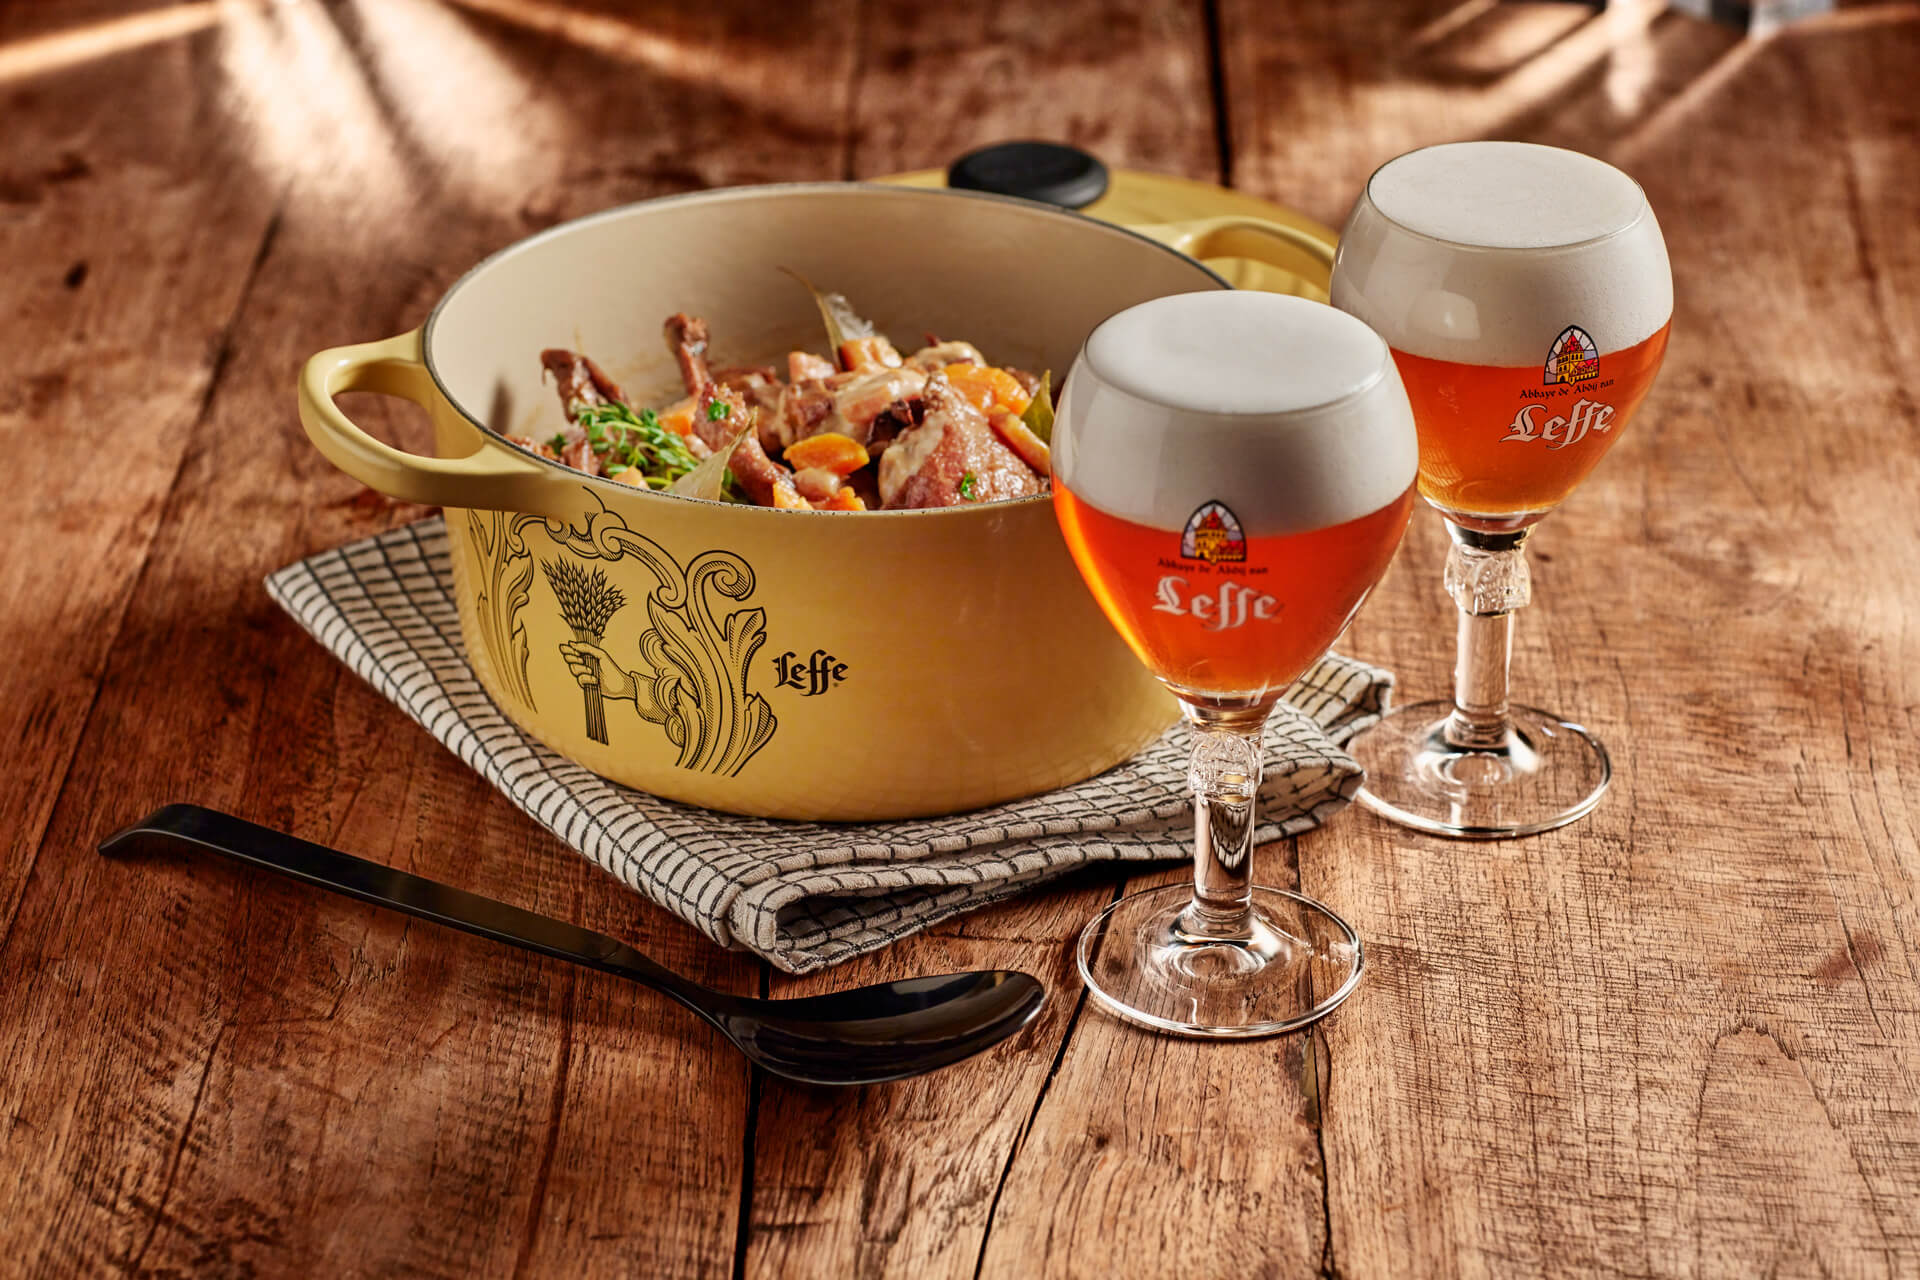 Leffe - food photography by Erik de Koning - pot with 2 glasses of beer